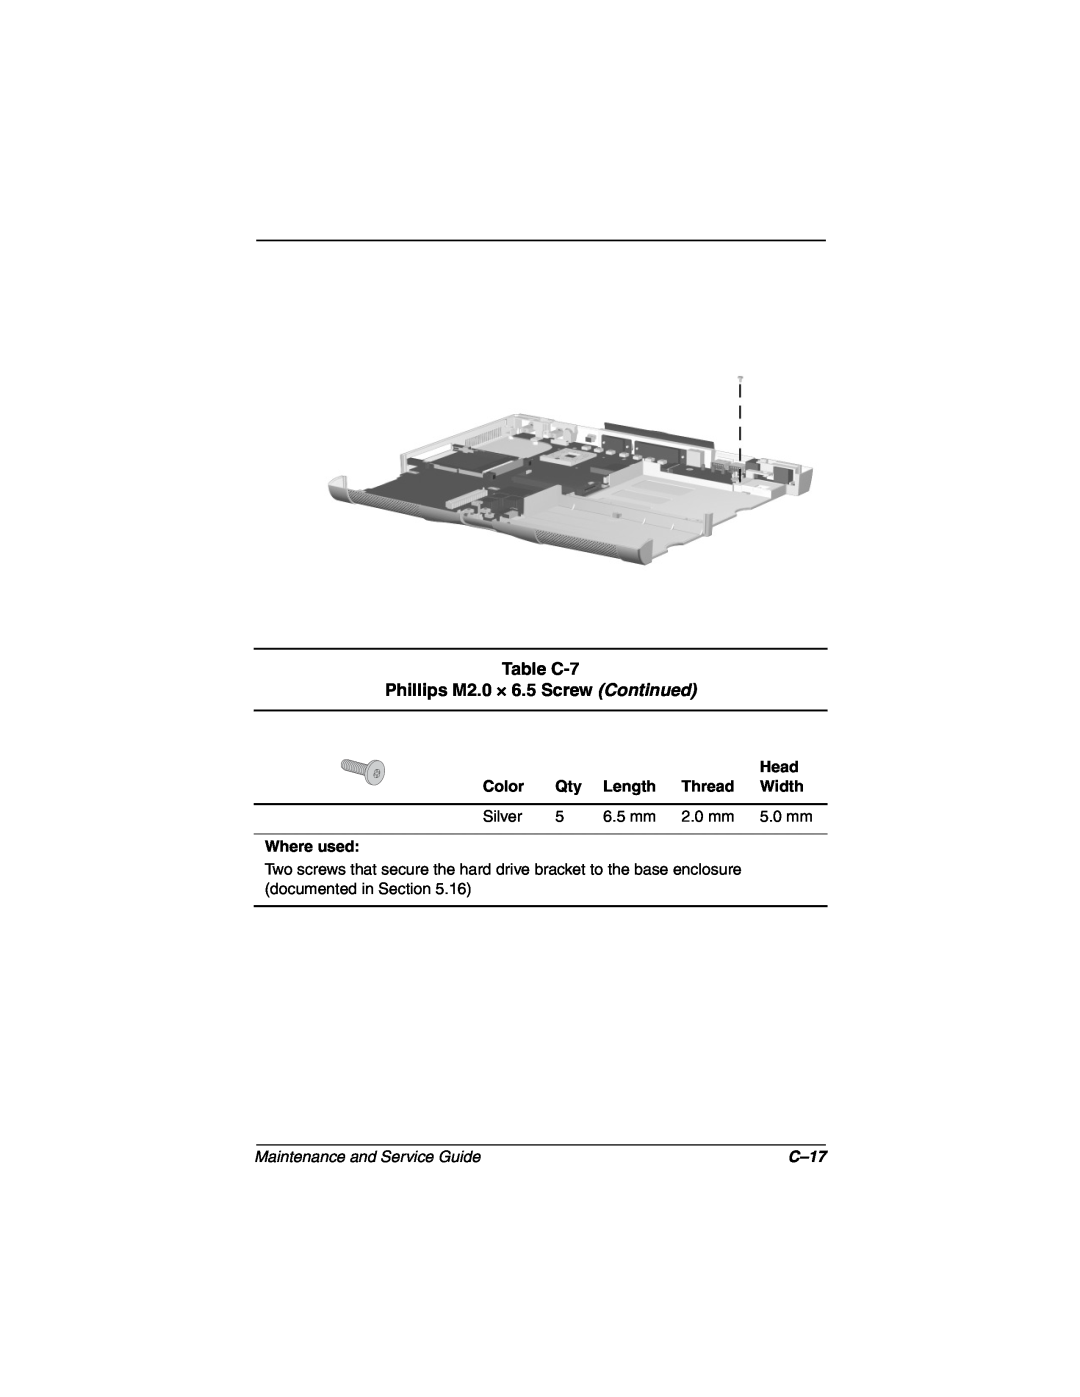 Compaq N160 manual Table C-7 Phillips M2.0 × 6.5 Screw Continued, Maintenance and Service Guide, C-17 